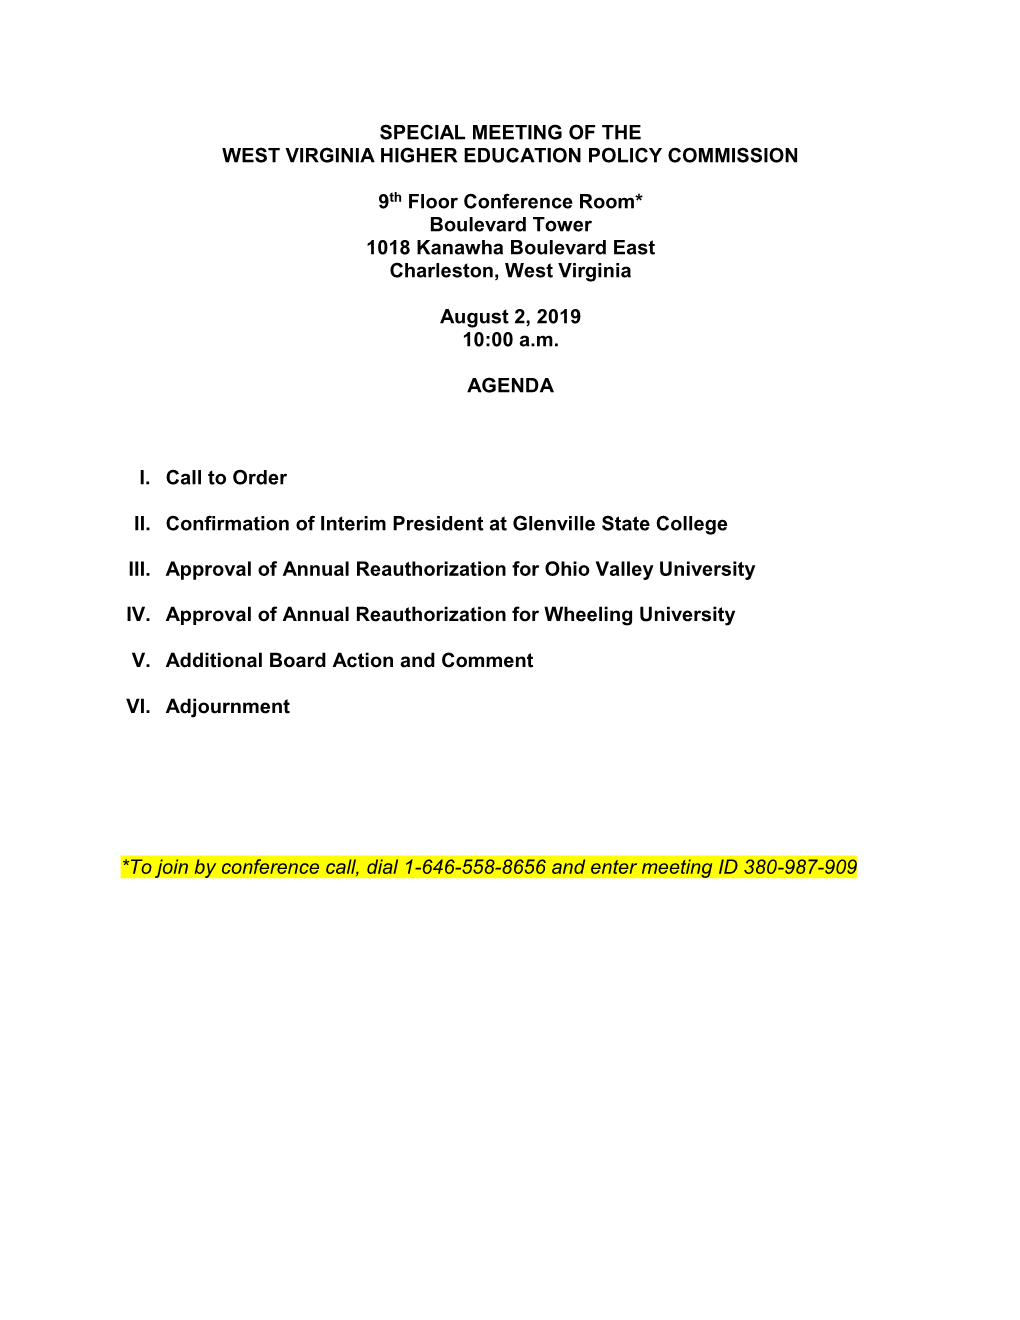 Special Meeting of the West Virginia Higher Education Policy Commission